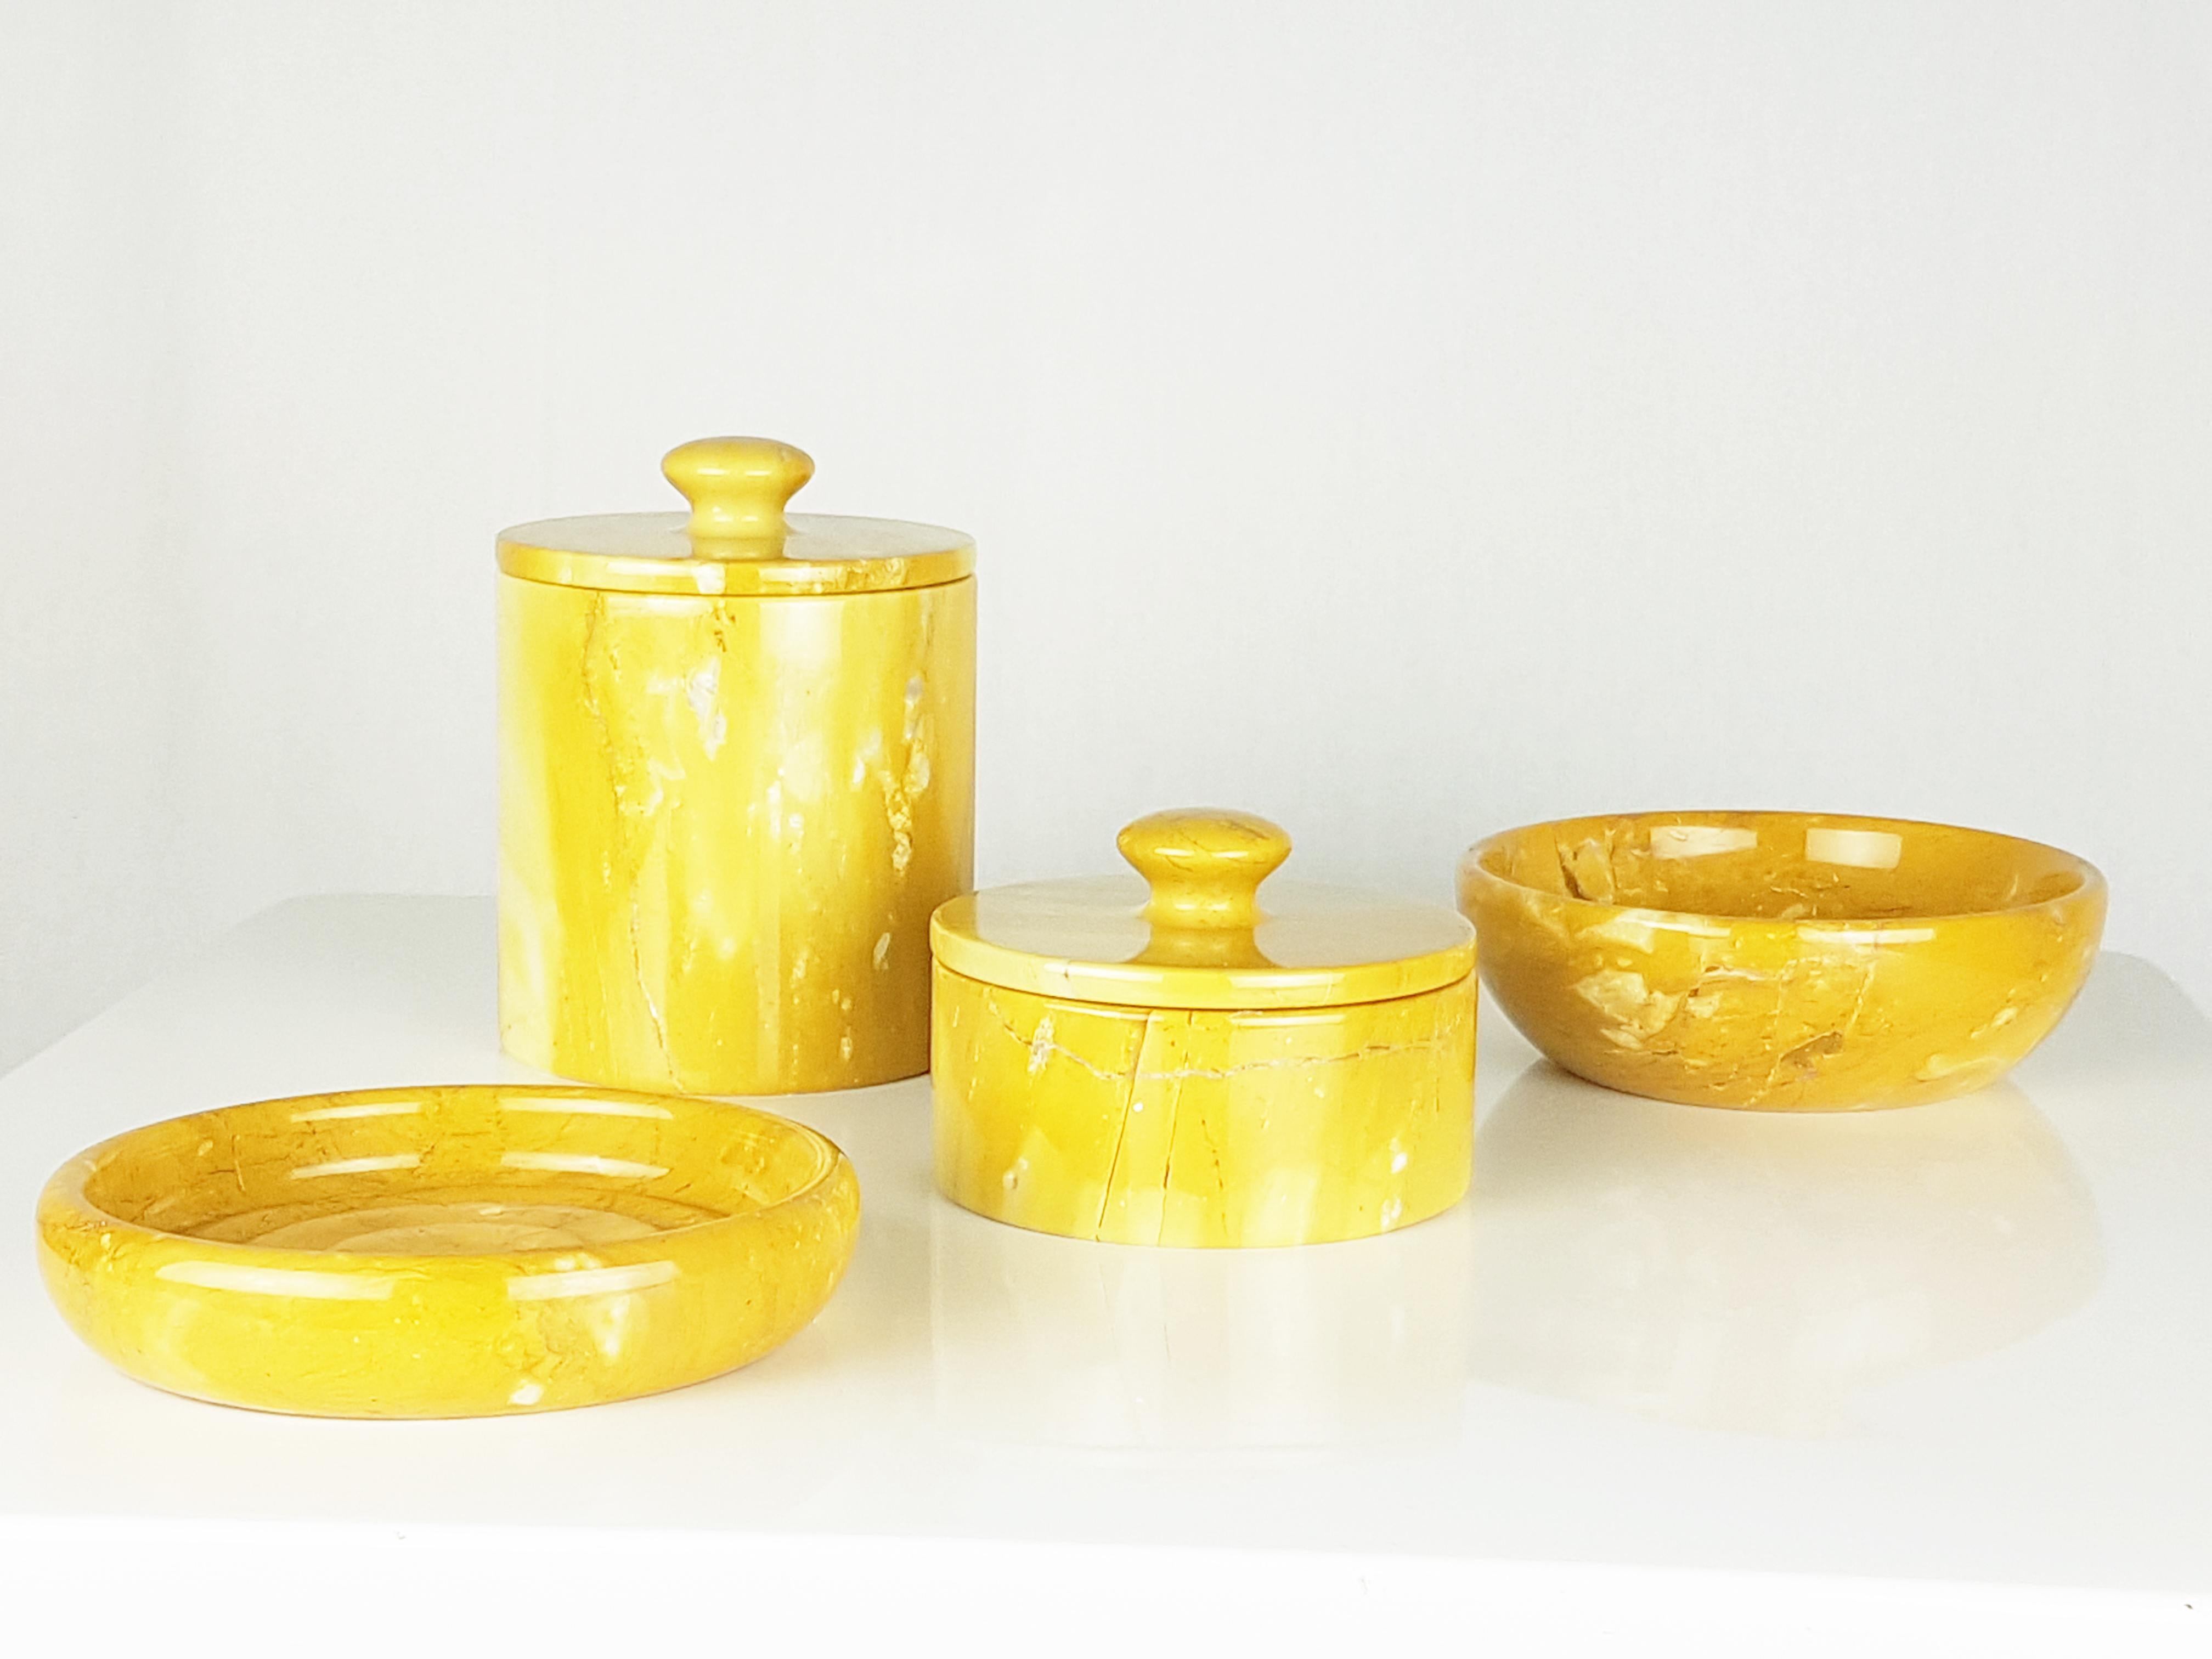 This set consists of 4 pieces made of yellow marble (I think it is the so-called 